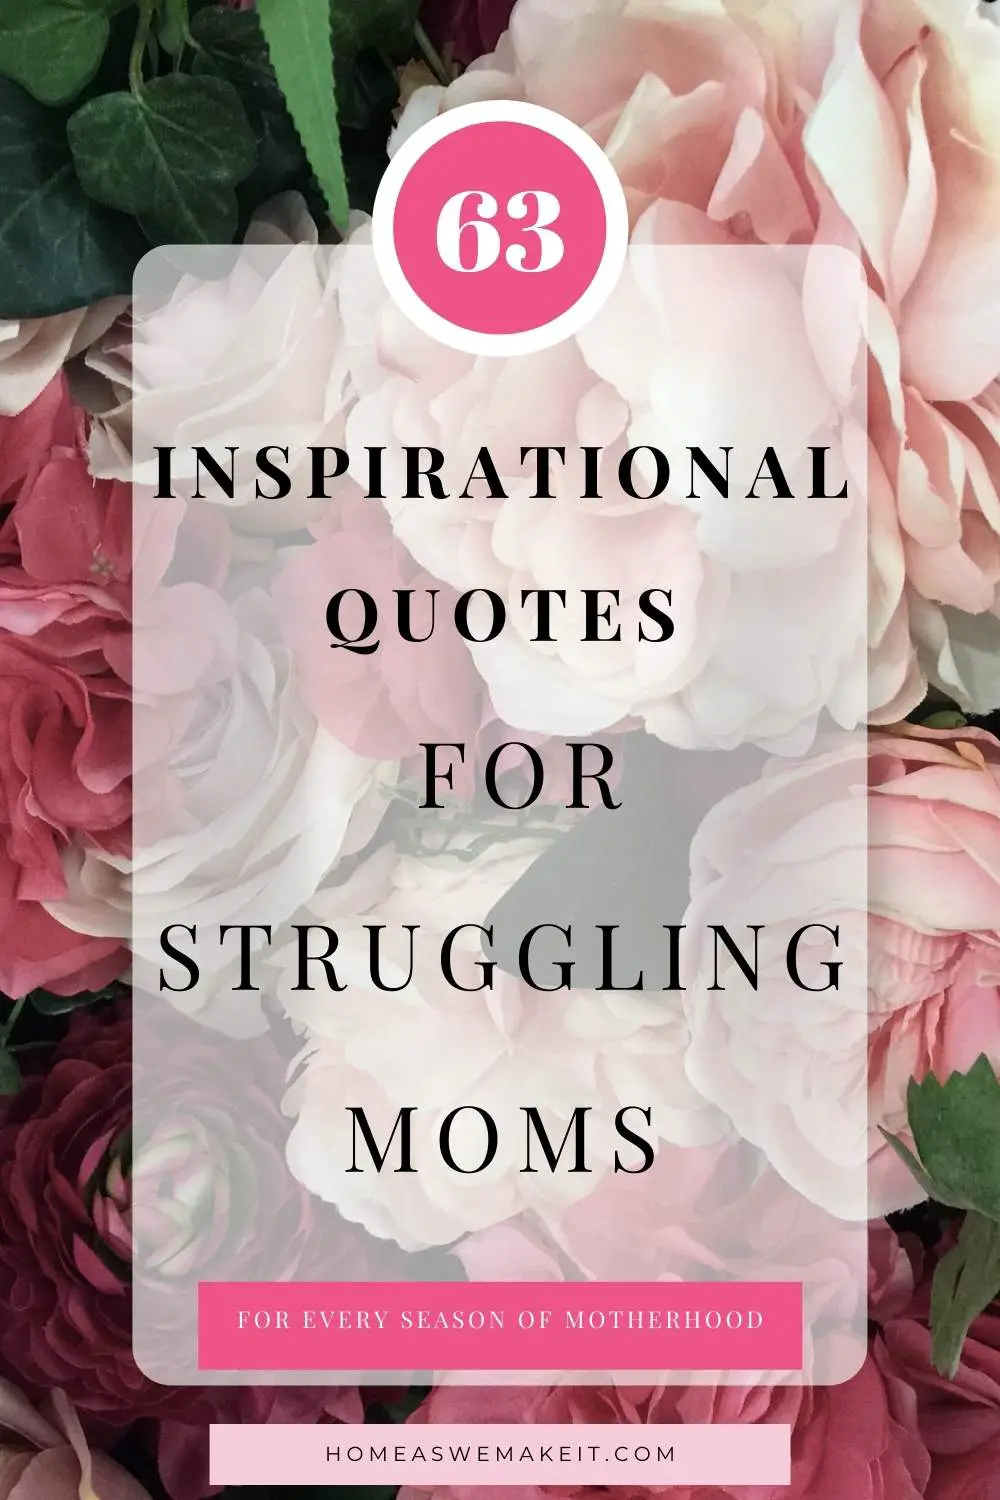 63 quotes for struggling moms